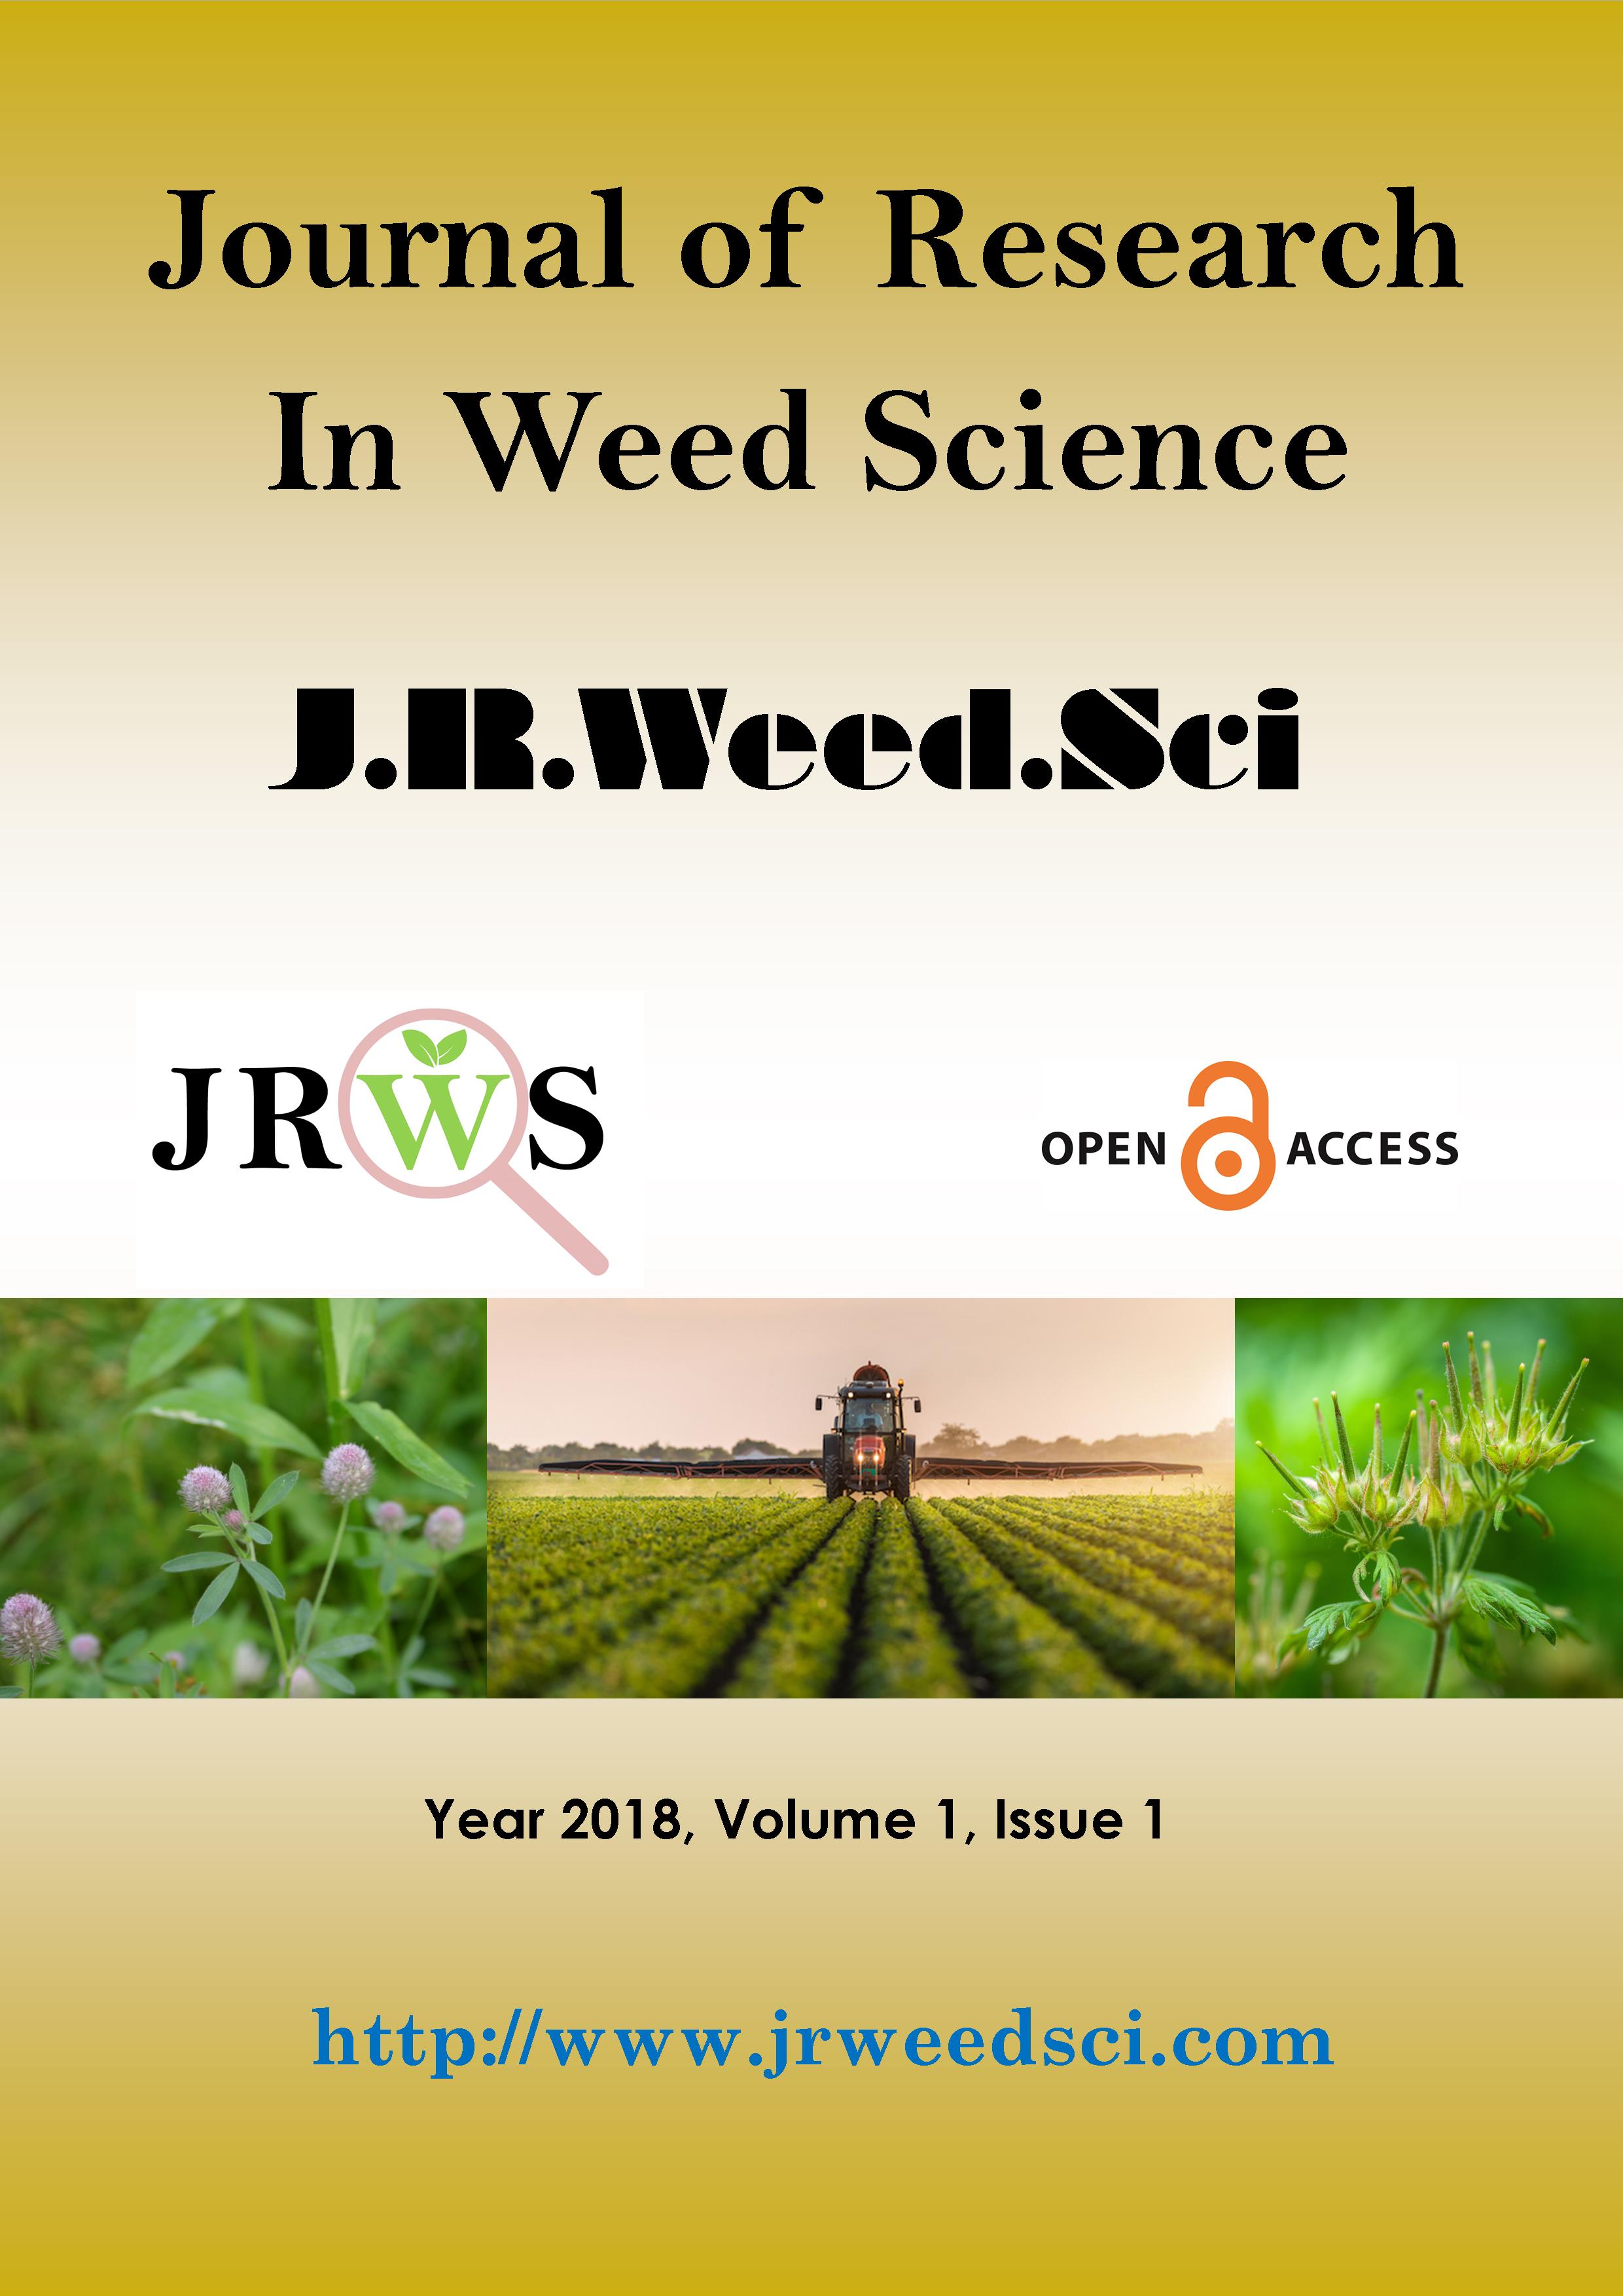 Journal of Research in Weed Science